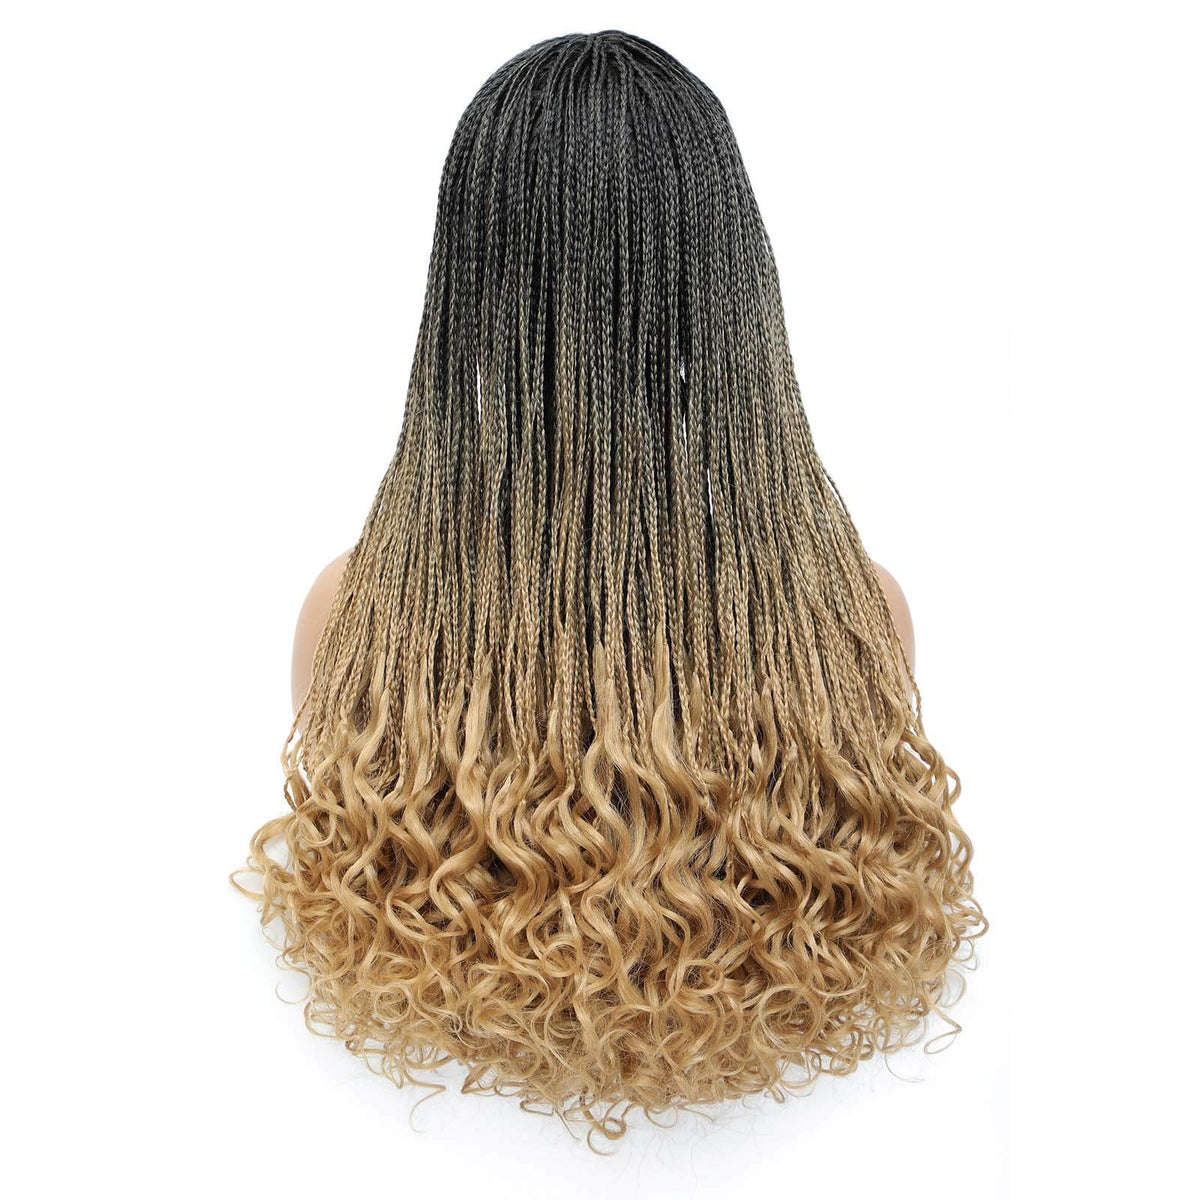 Box Braided Wig with Goddess Curly Ends Ombre Blonde #27 Color Right Back Show